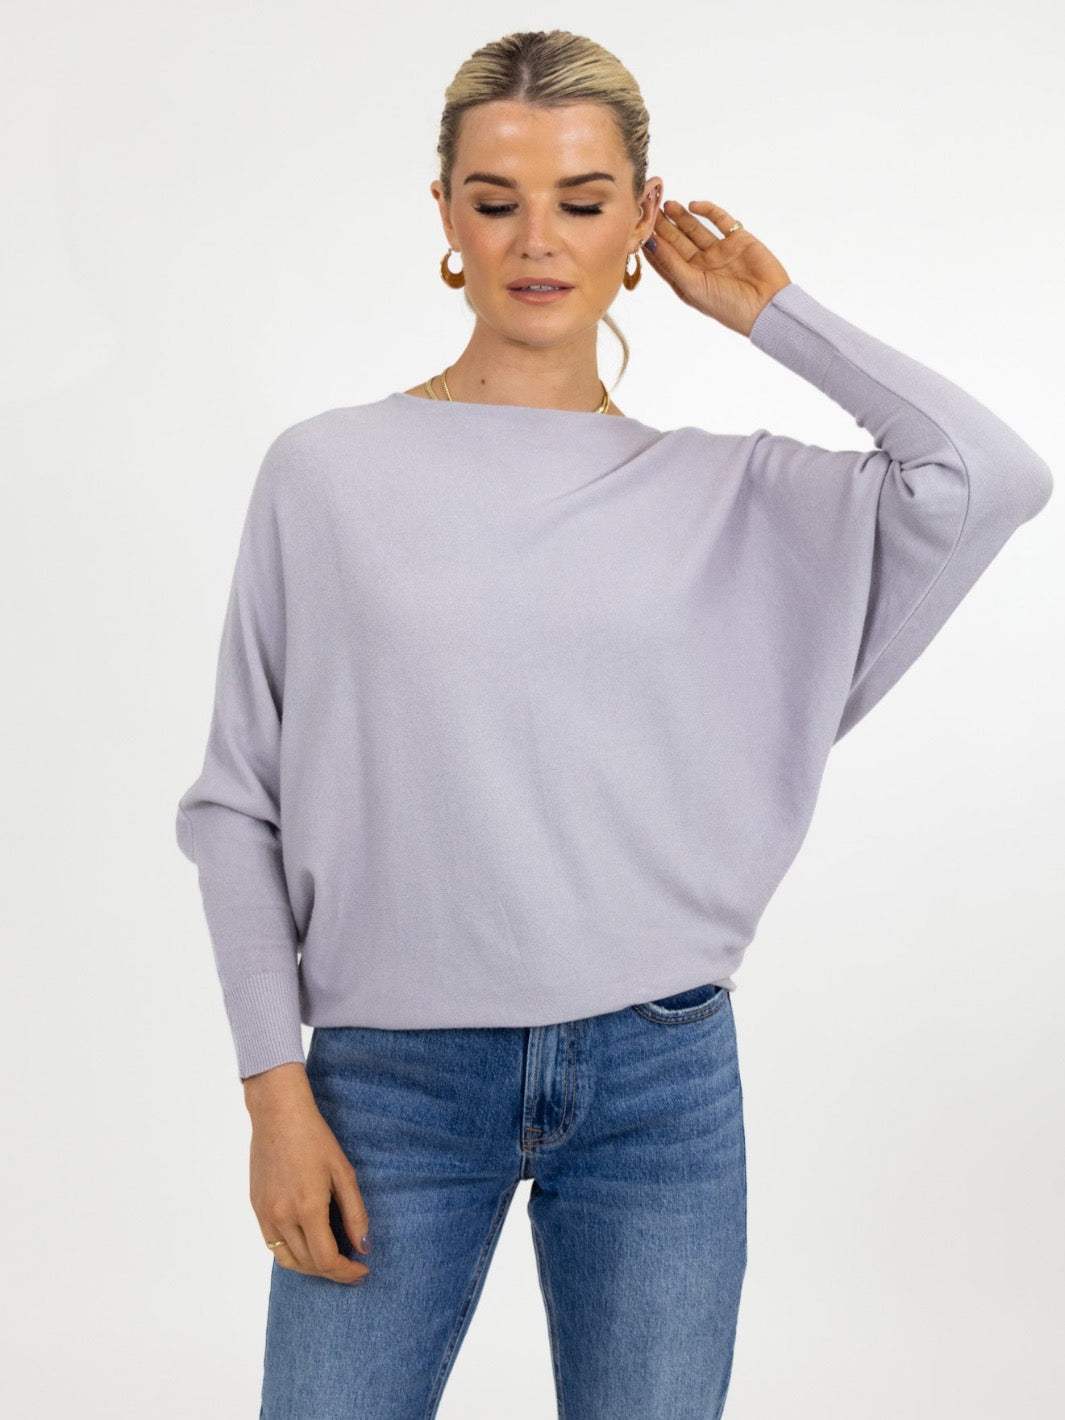 Kate & Pippa Milano Batwing Knit In Silver-Nicola Ross